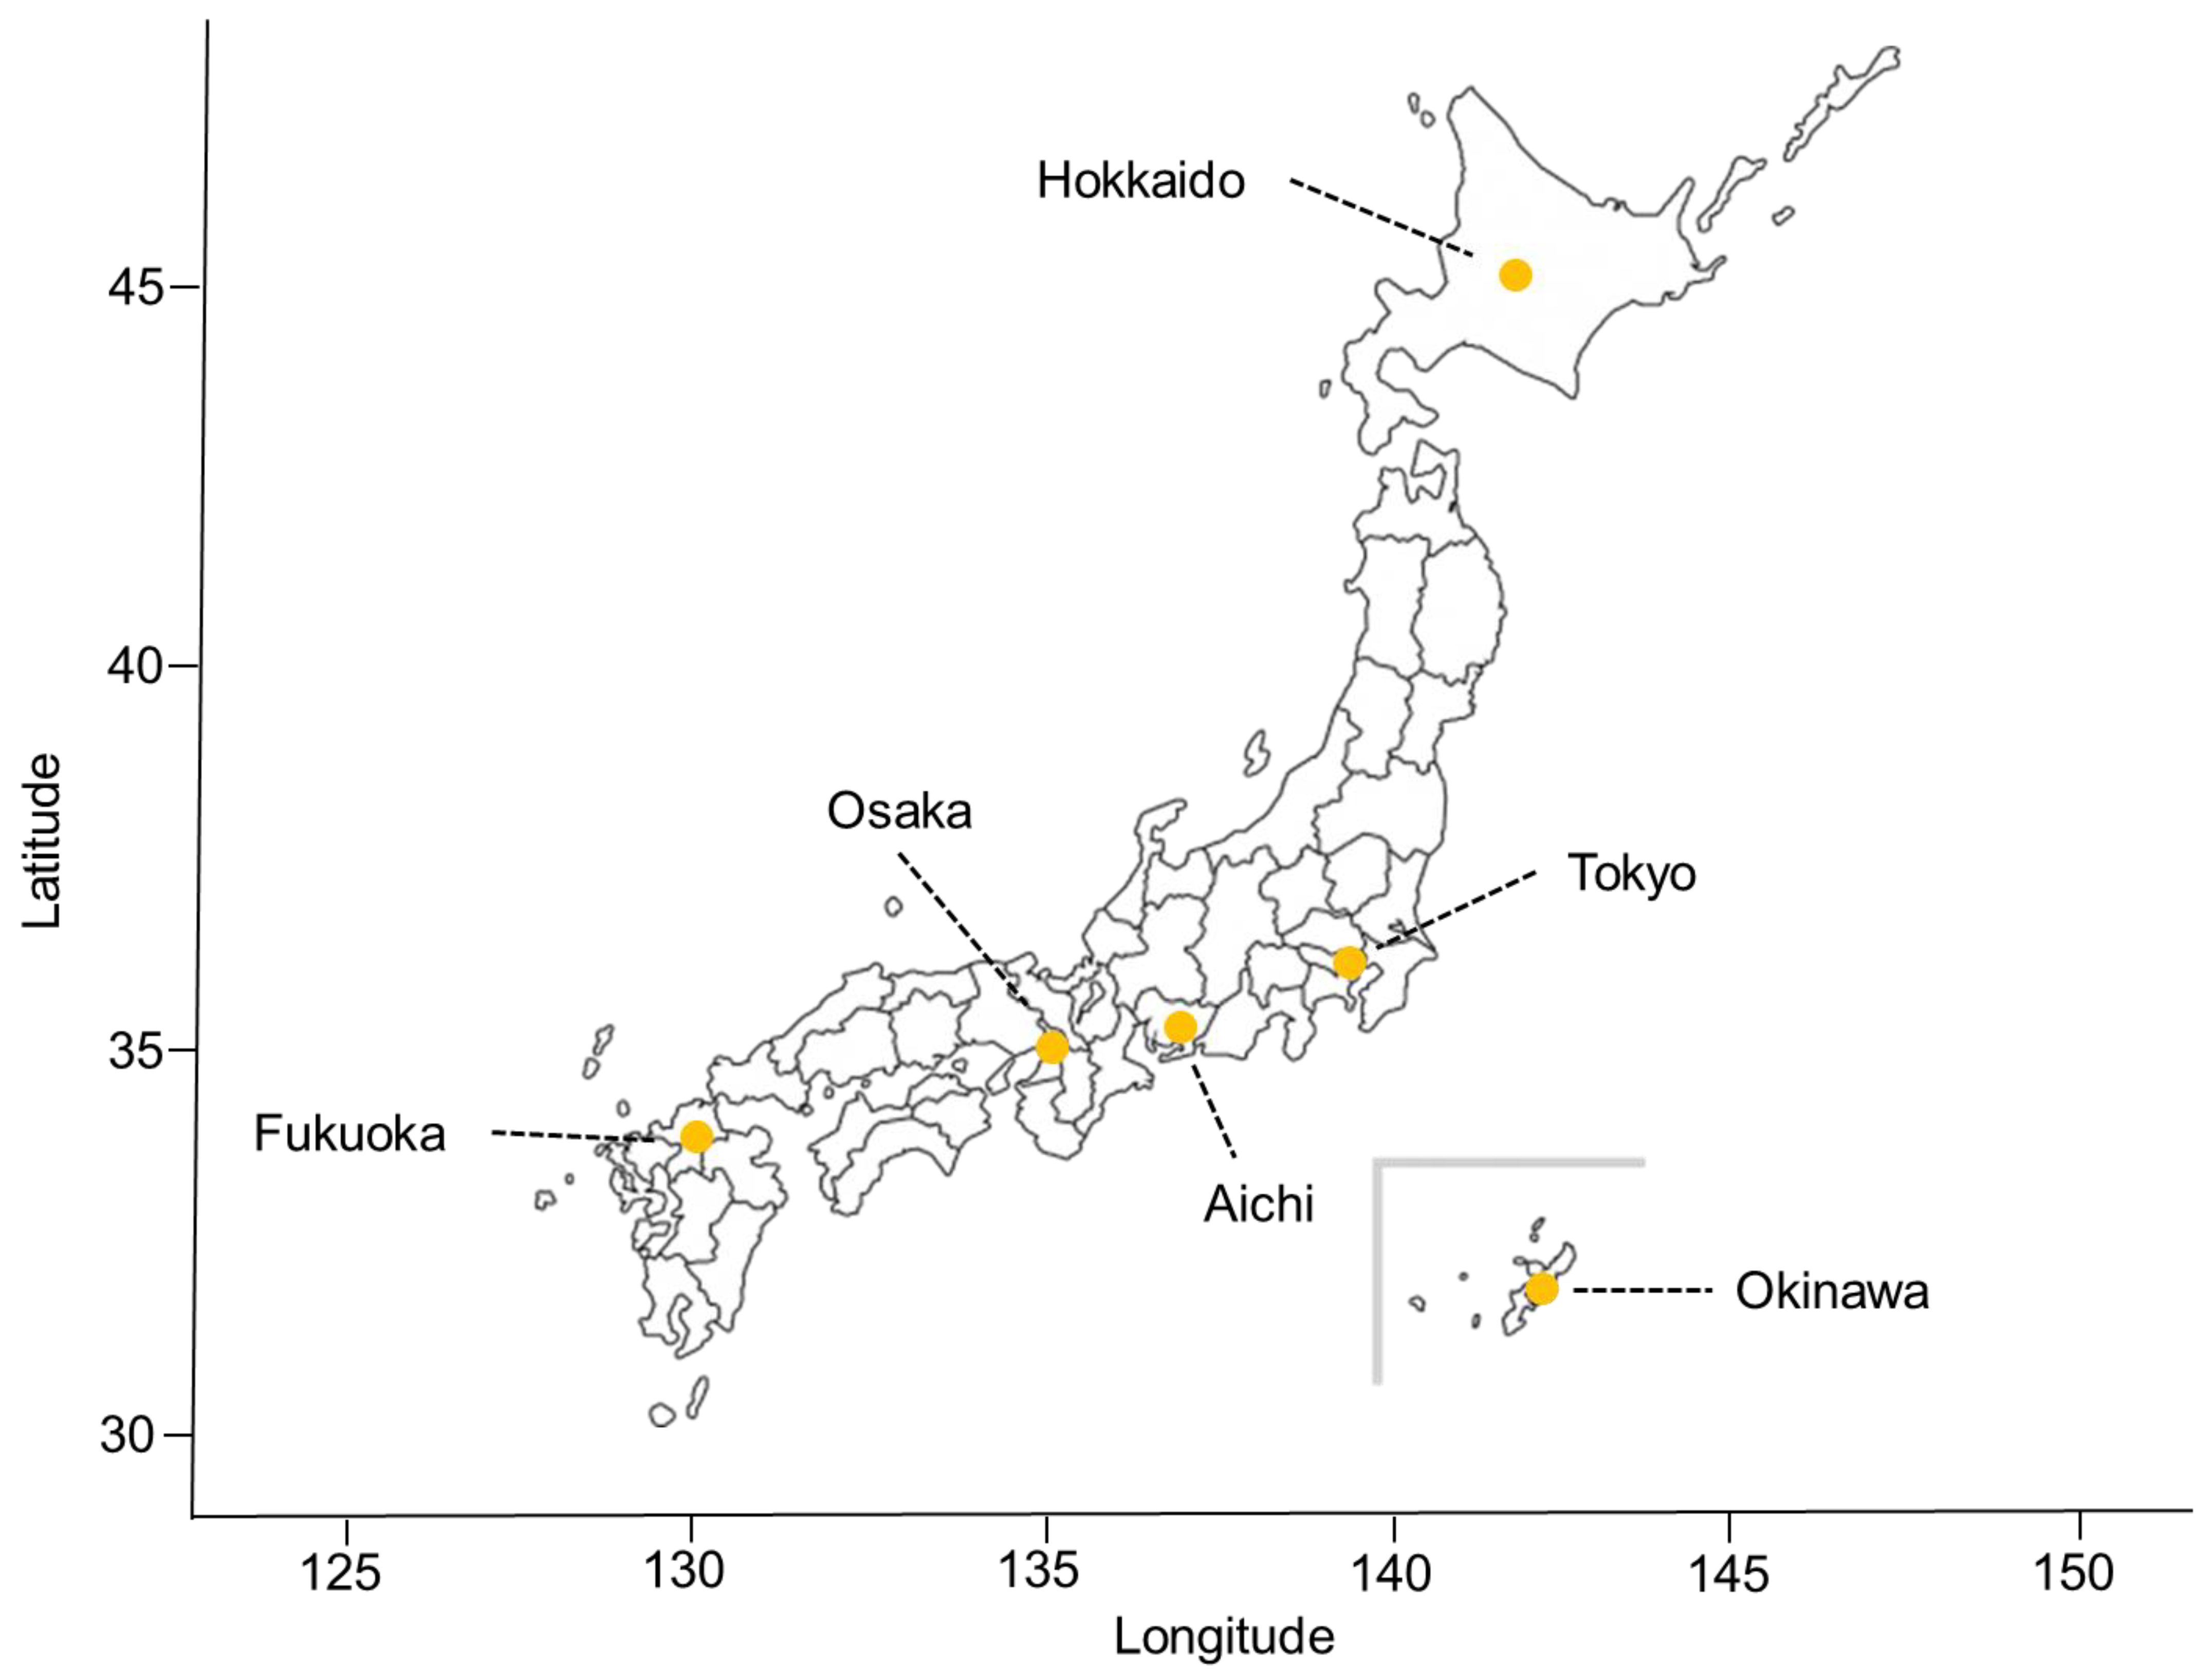 Viruses | Free Full-Text | The Relative Roles of Ambient Temperature and  Mobility Patterns in Shaping the Transmission Heterogeneity of SARS-CoV-2  in Japan